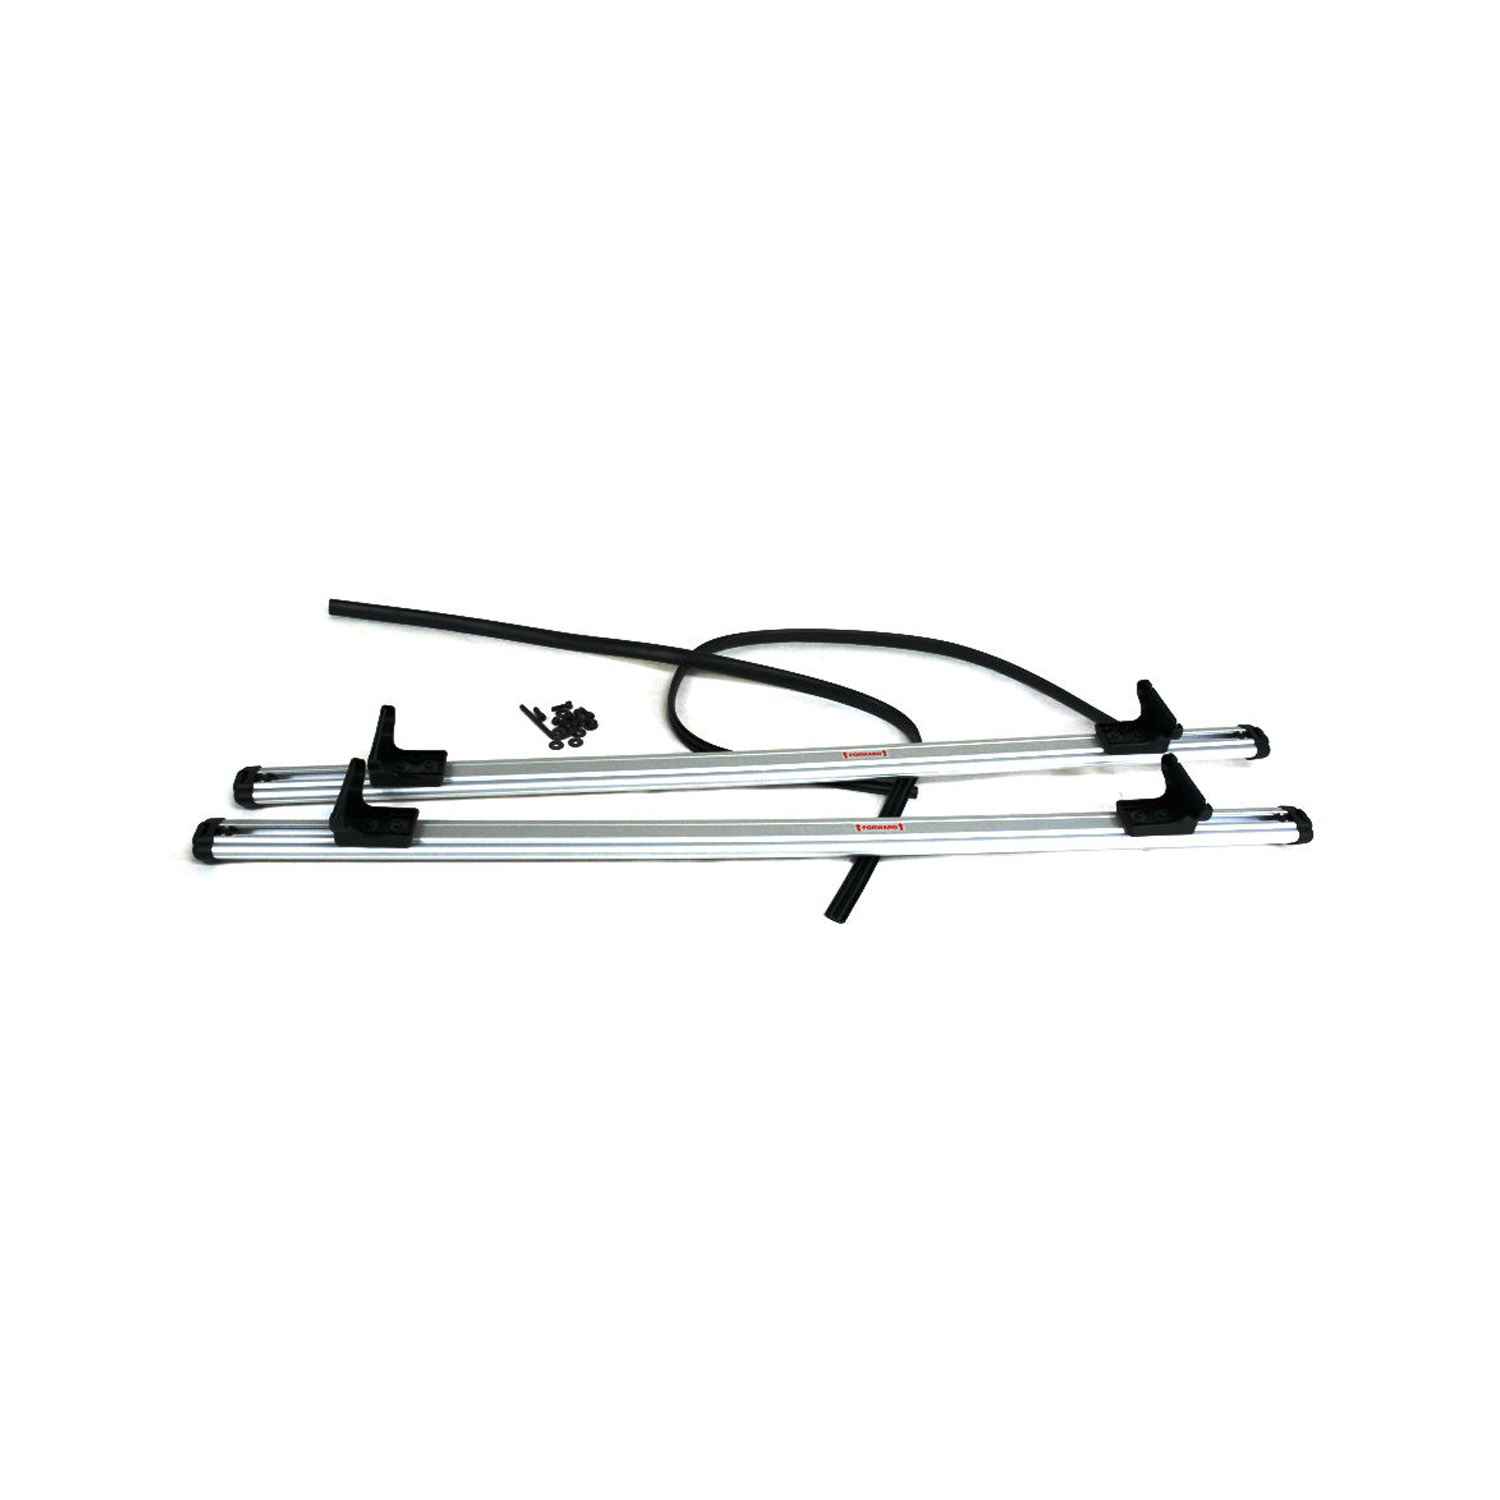 2012 Jeep Compass Removable Roof Rack Kit 82212352